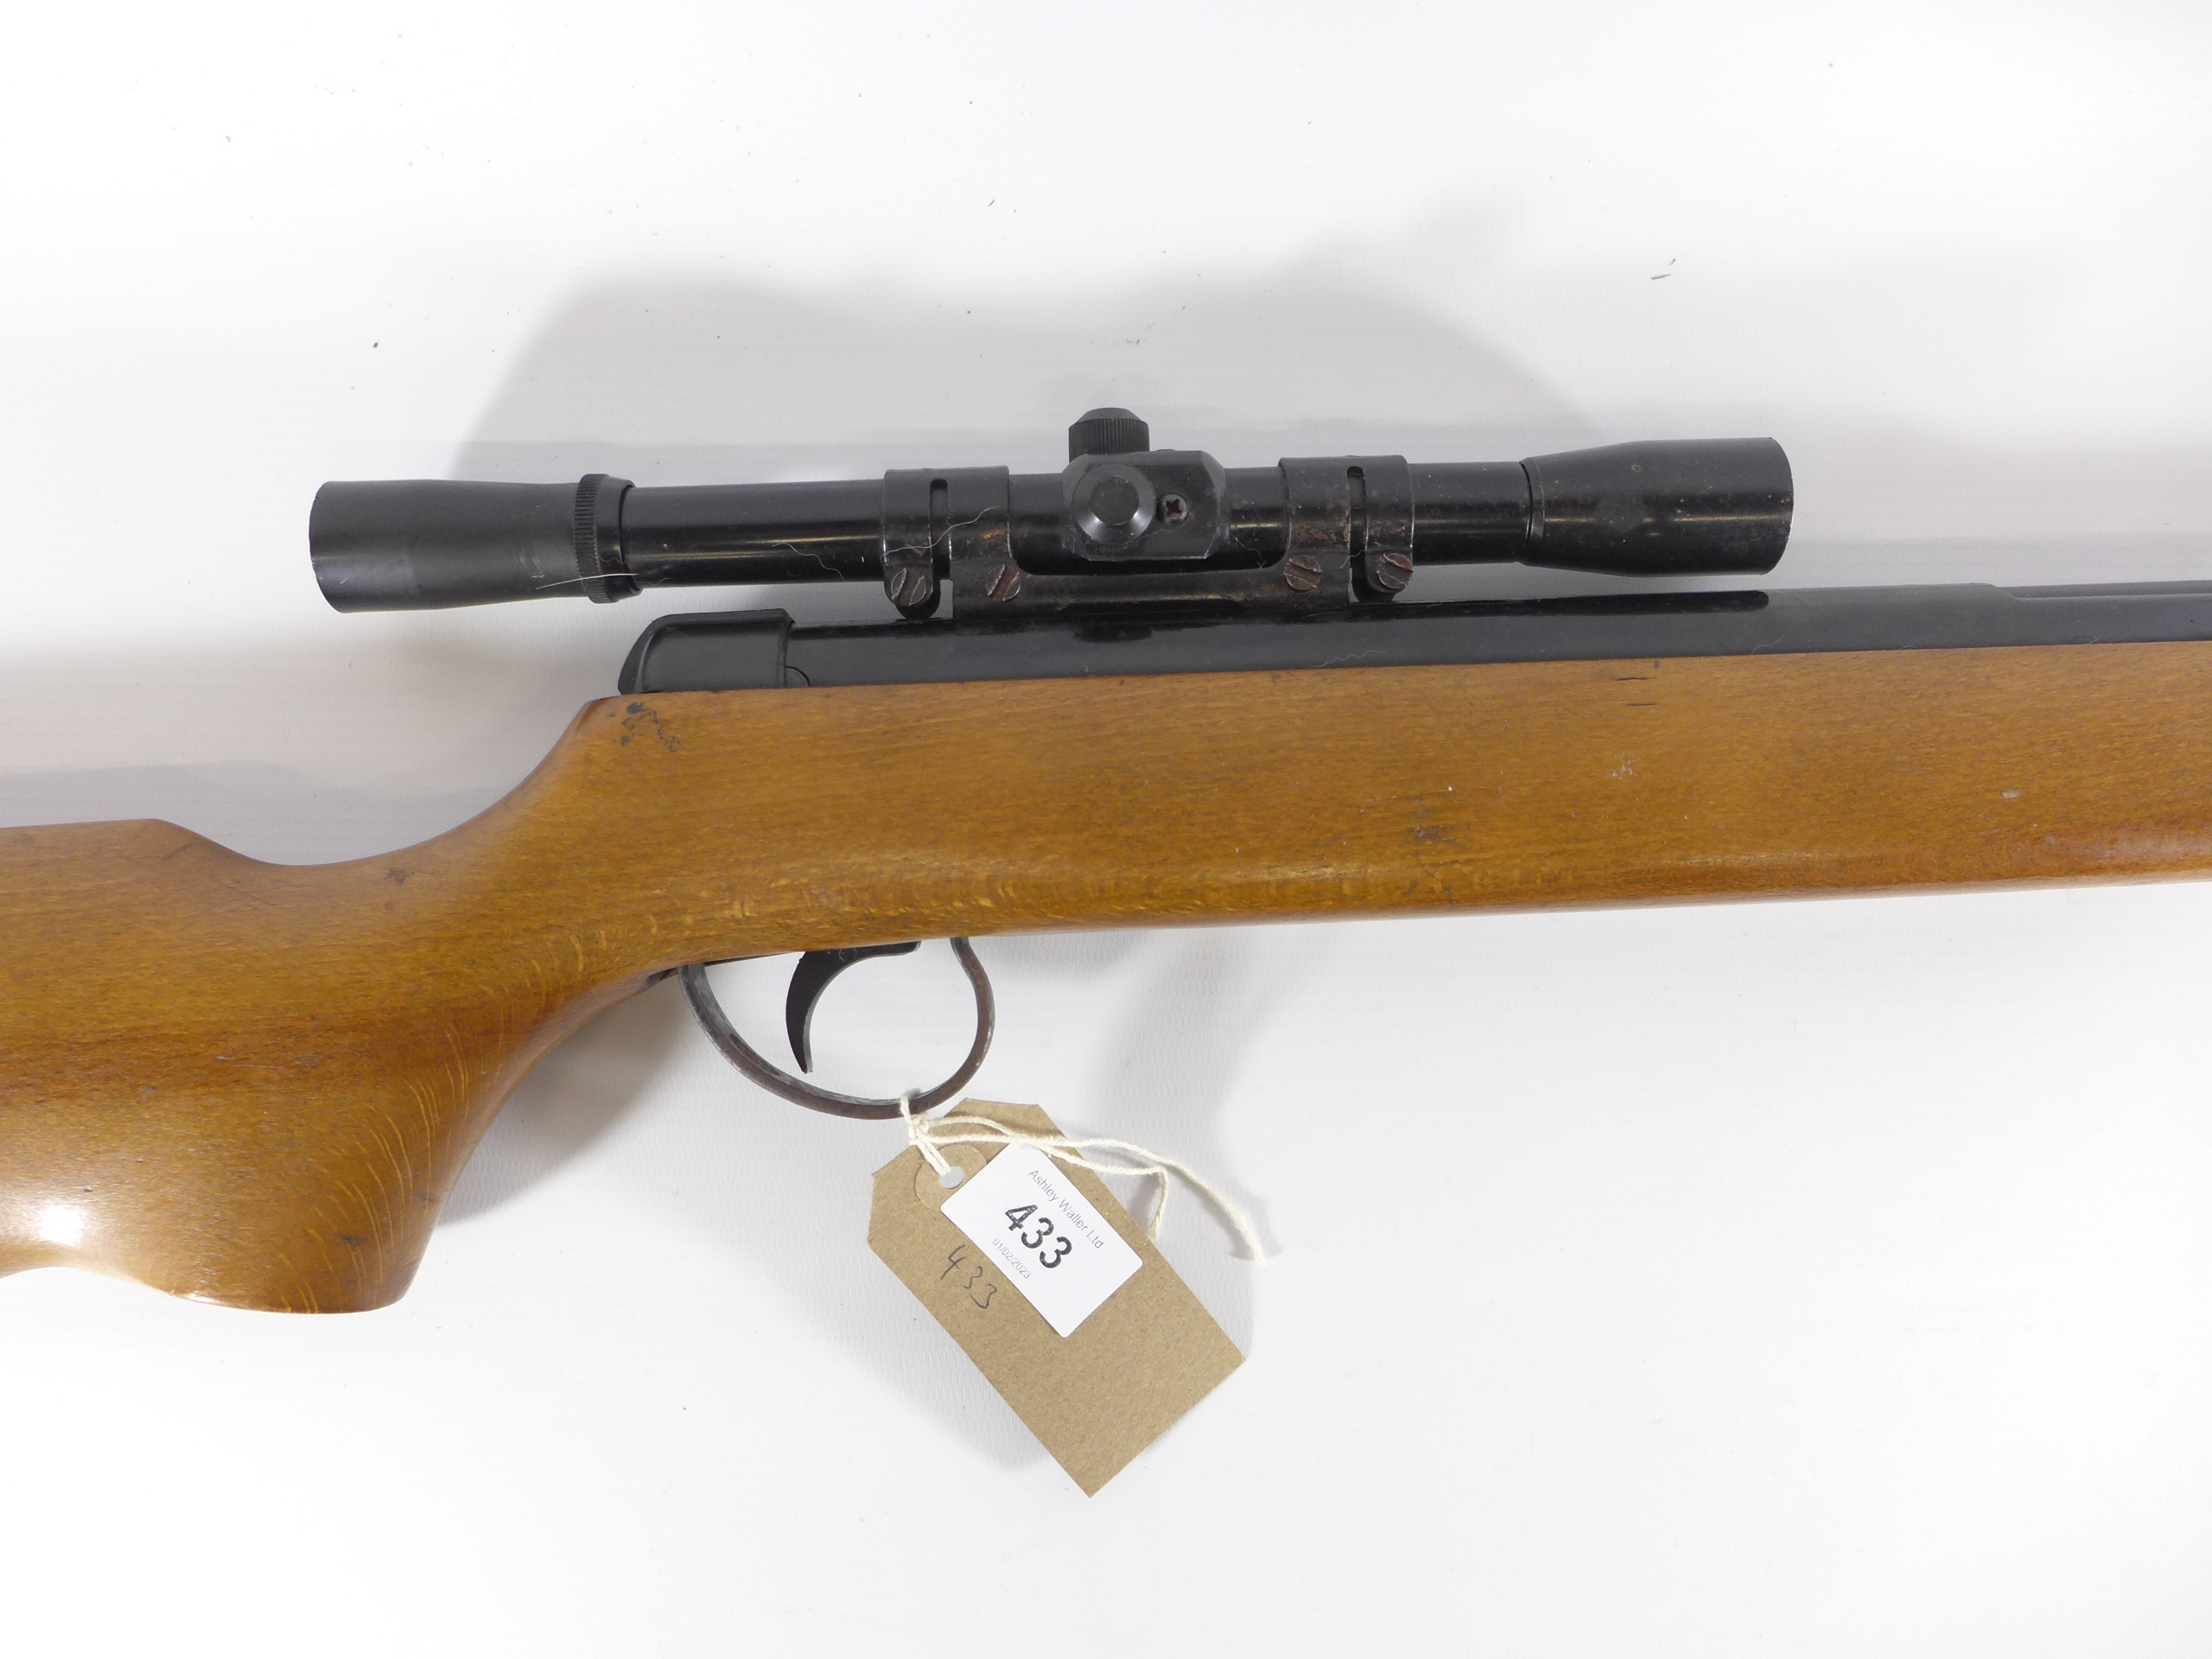 A BSA METEOR .22 CALIBRE AIR RIFLE, 47CM BARREL, WITH TELESCOPIC SIGHTS - Image 2 of 4